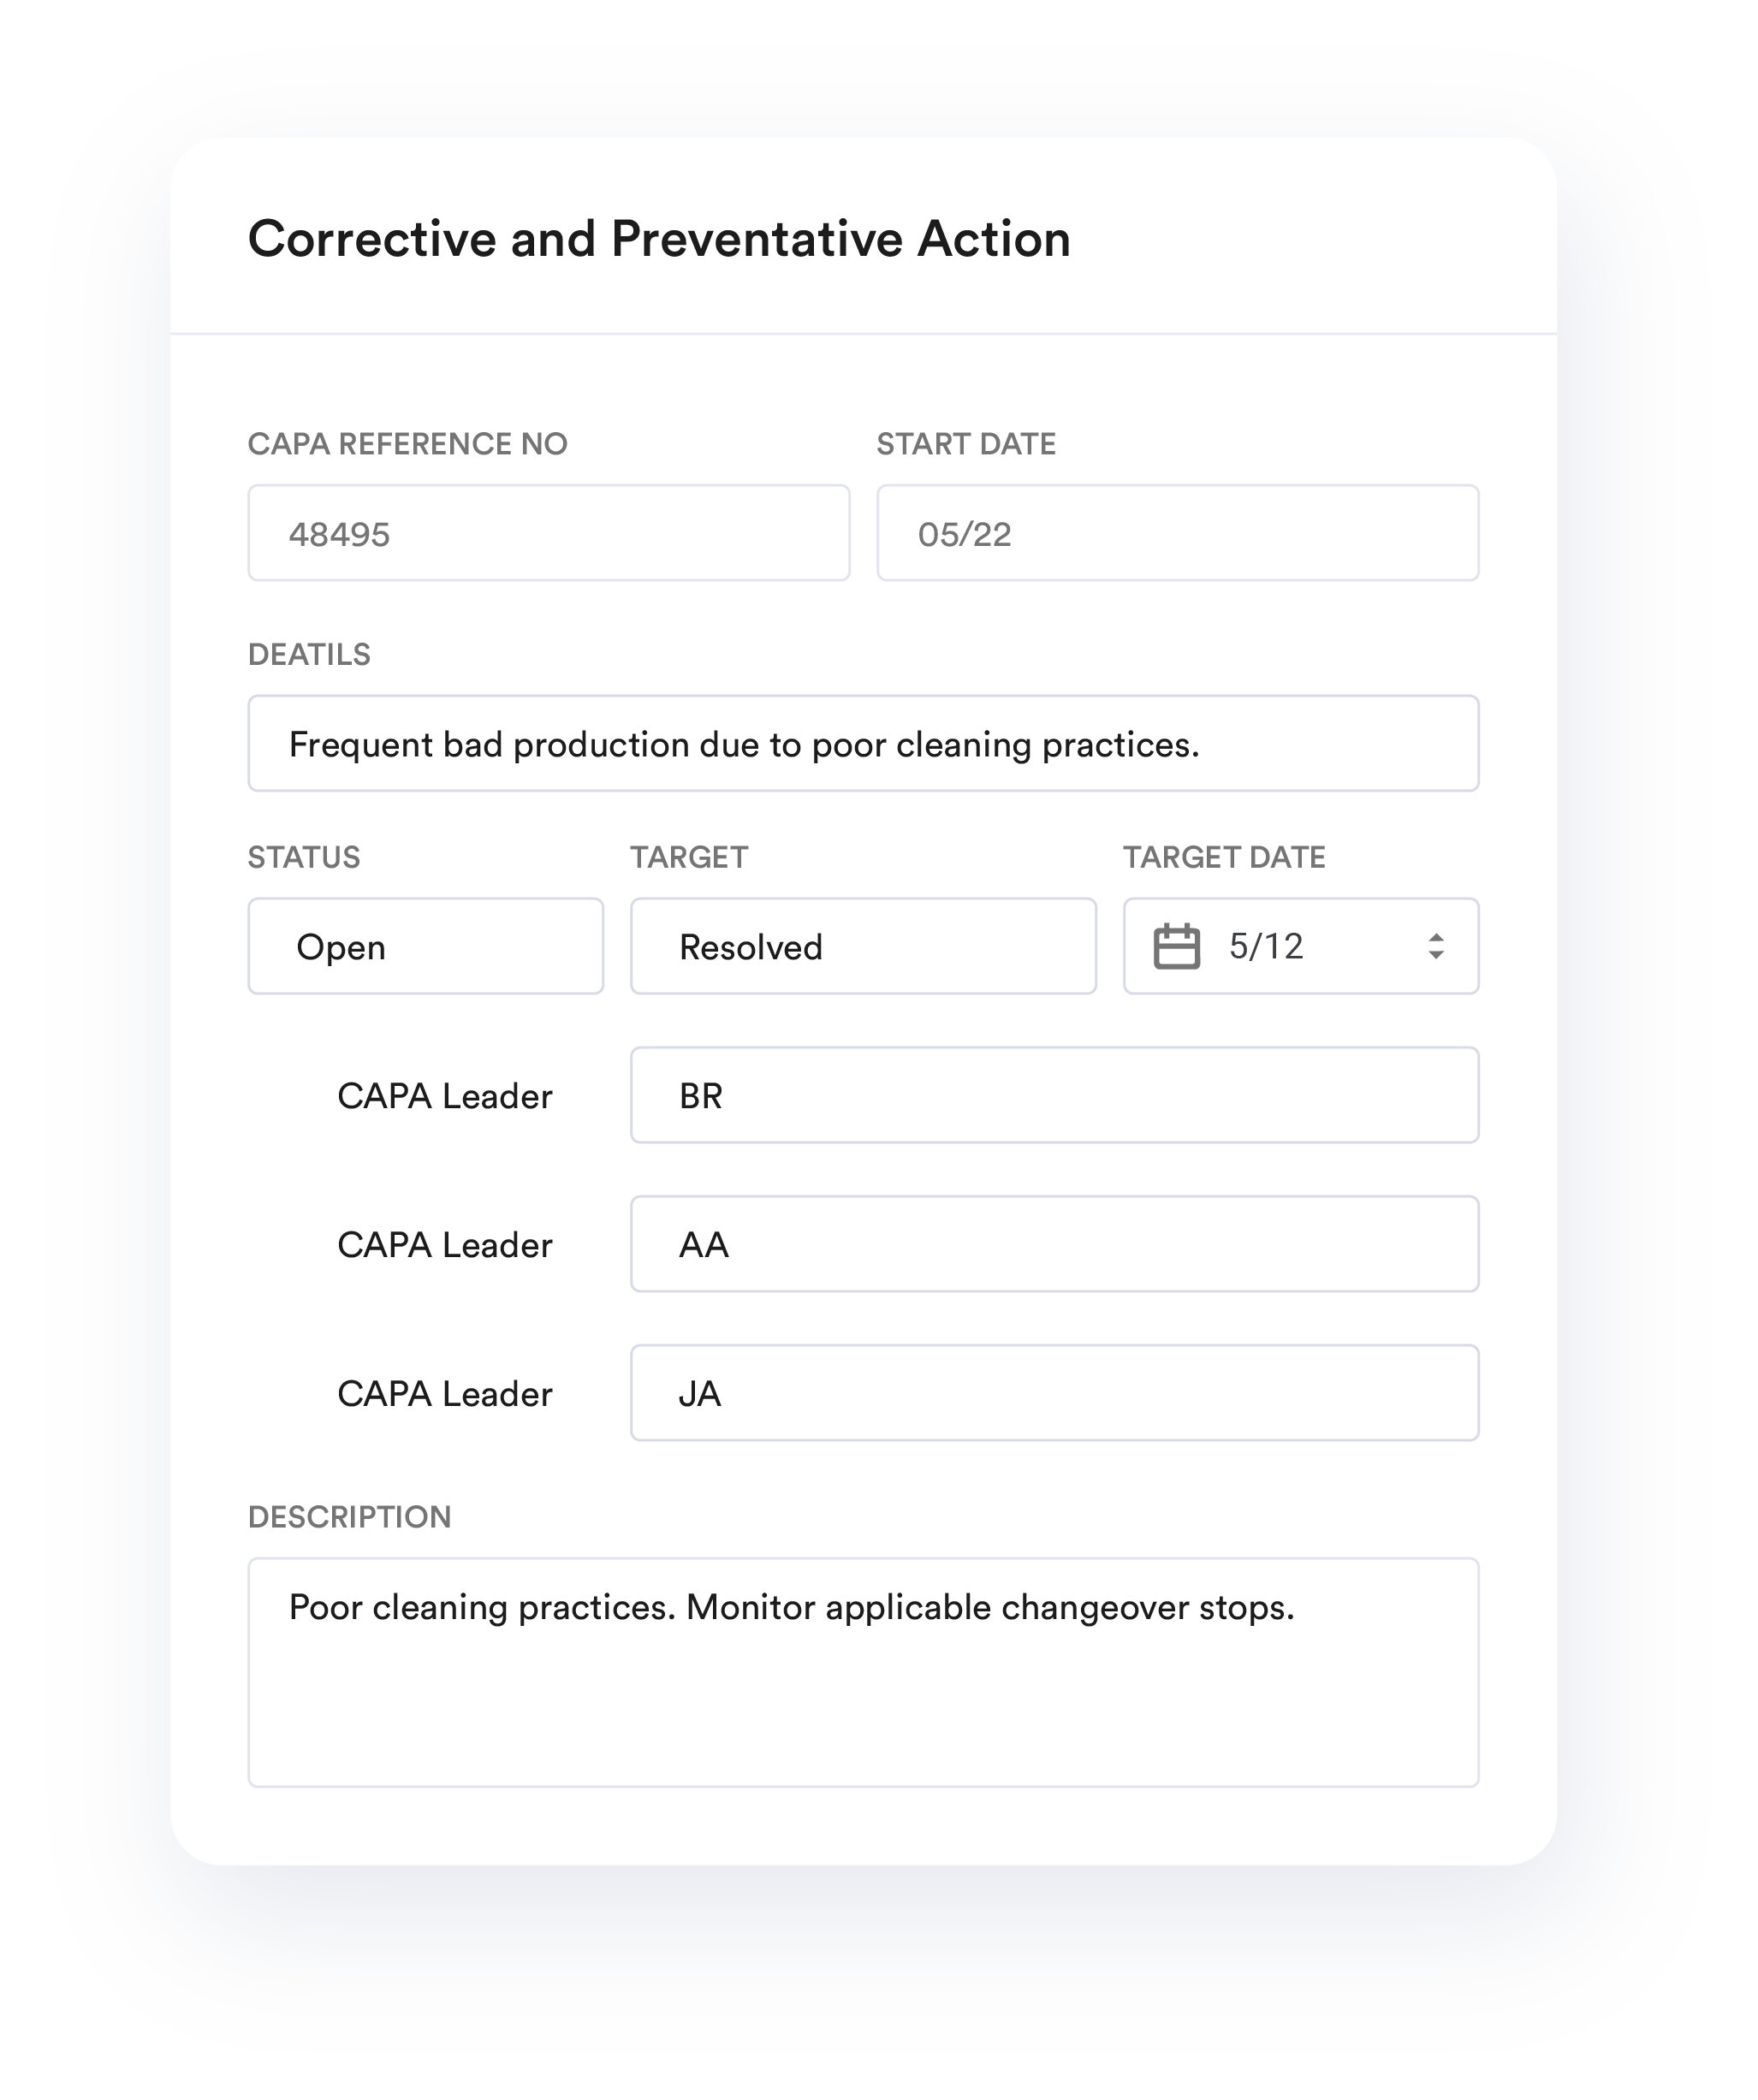 Corrective and Preventive Action Software Callout